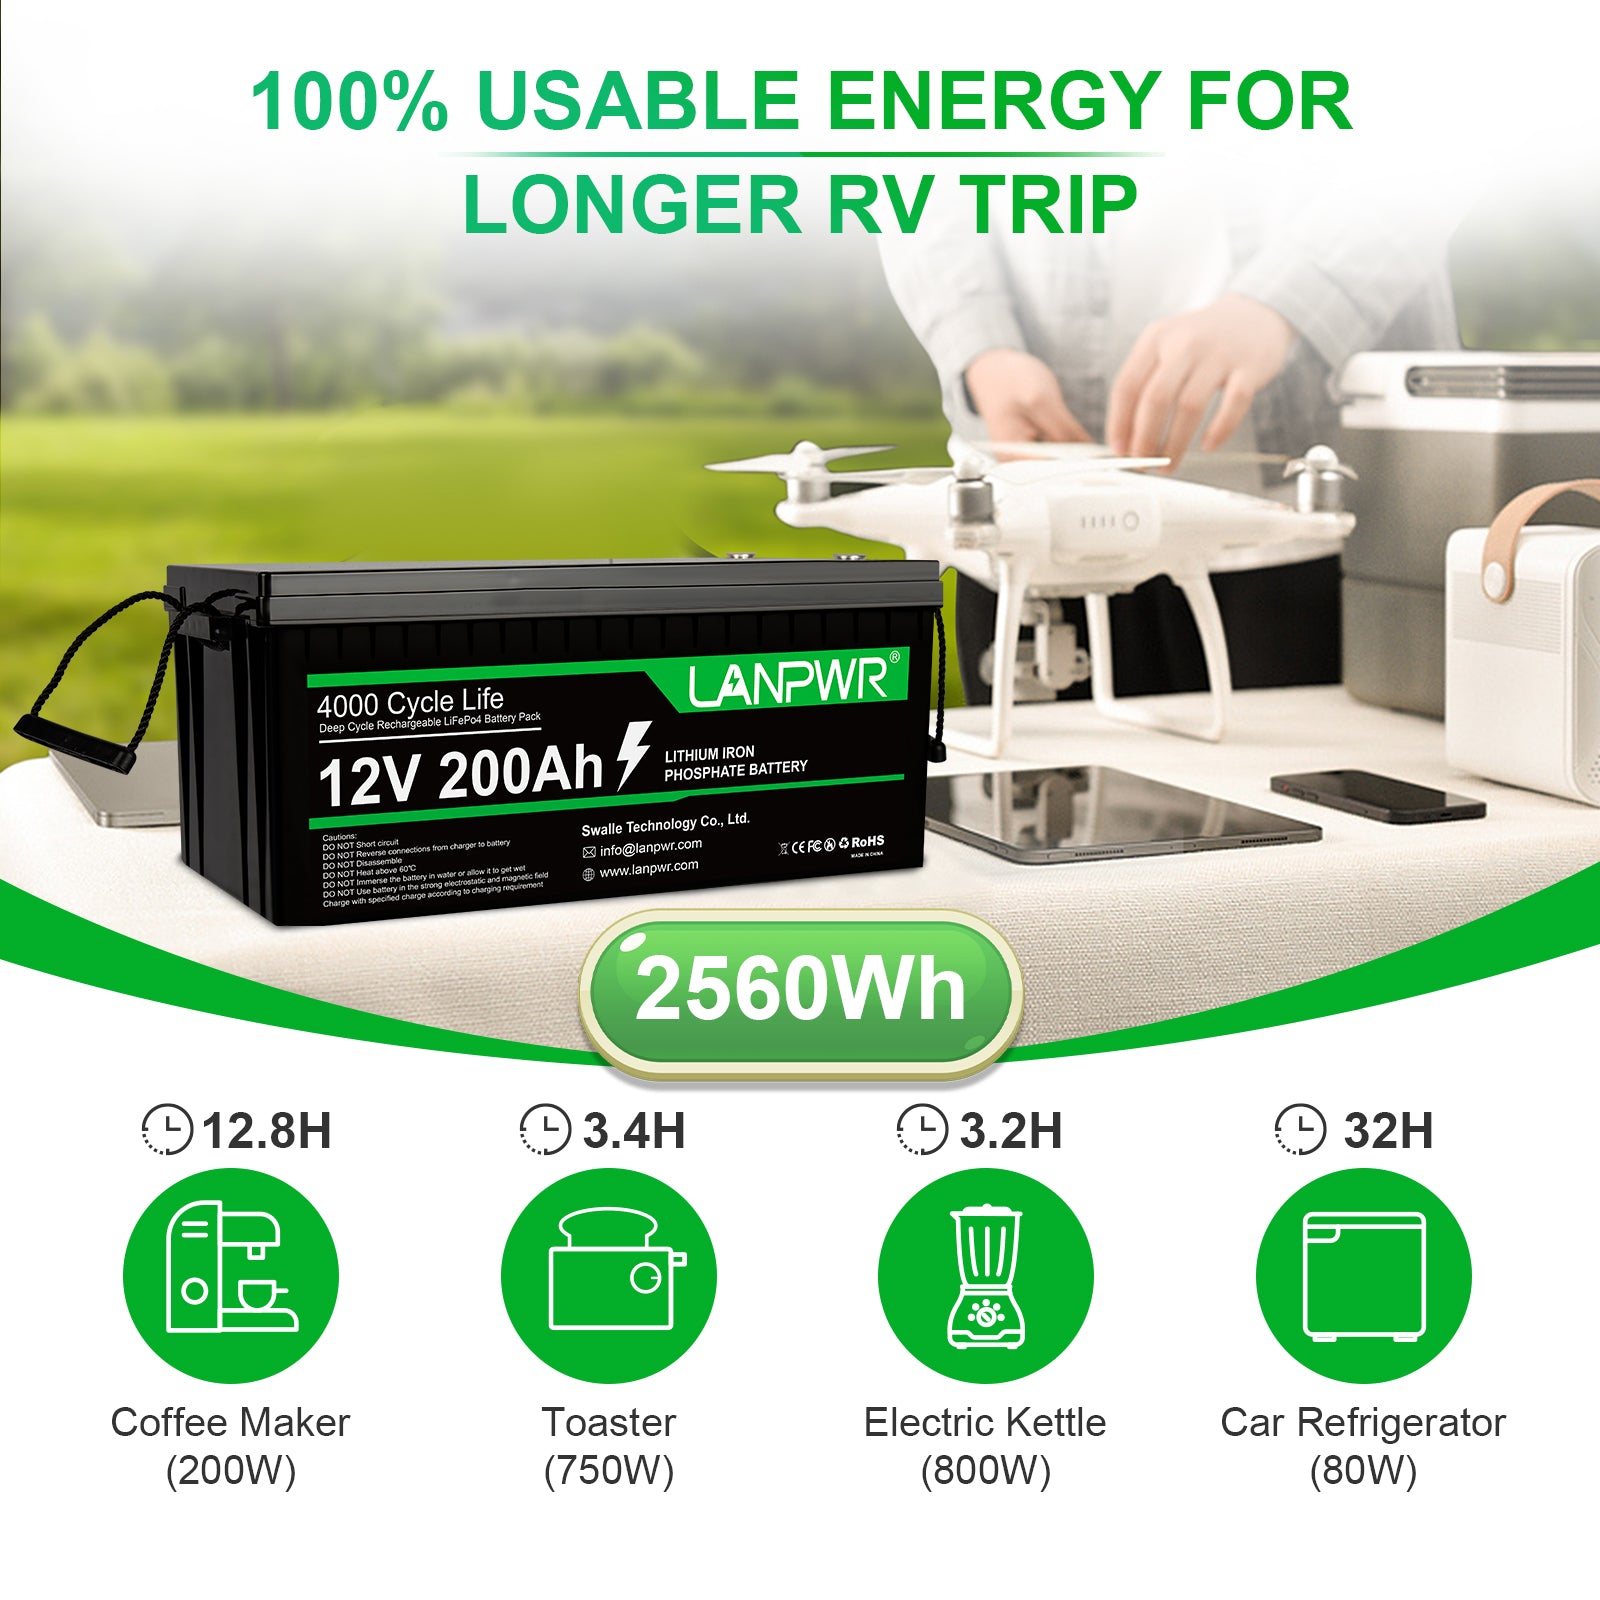 LANPWR 12V 200Ah LiFePO4 Battery, Built-In 200A BMS, 2560Wh Energy